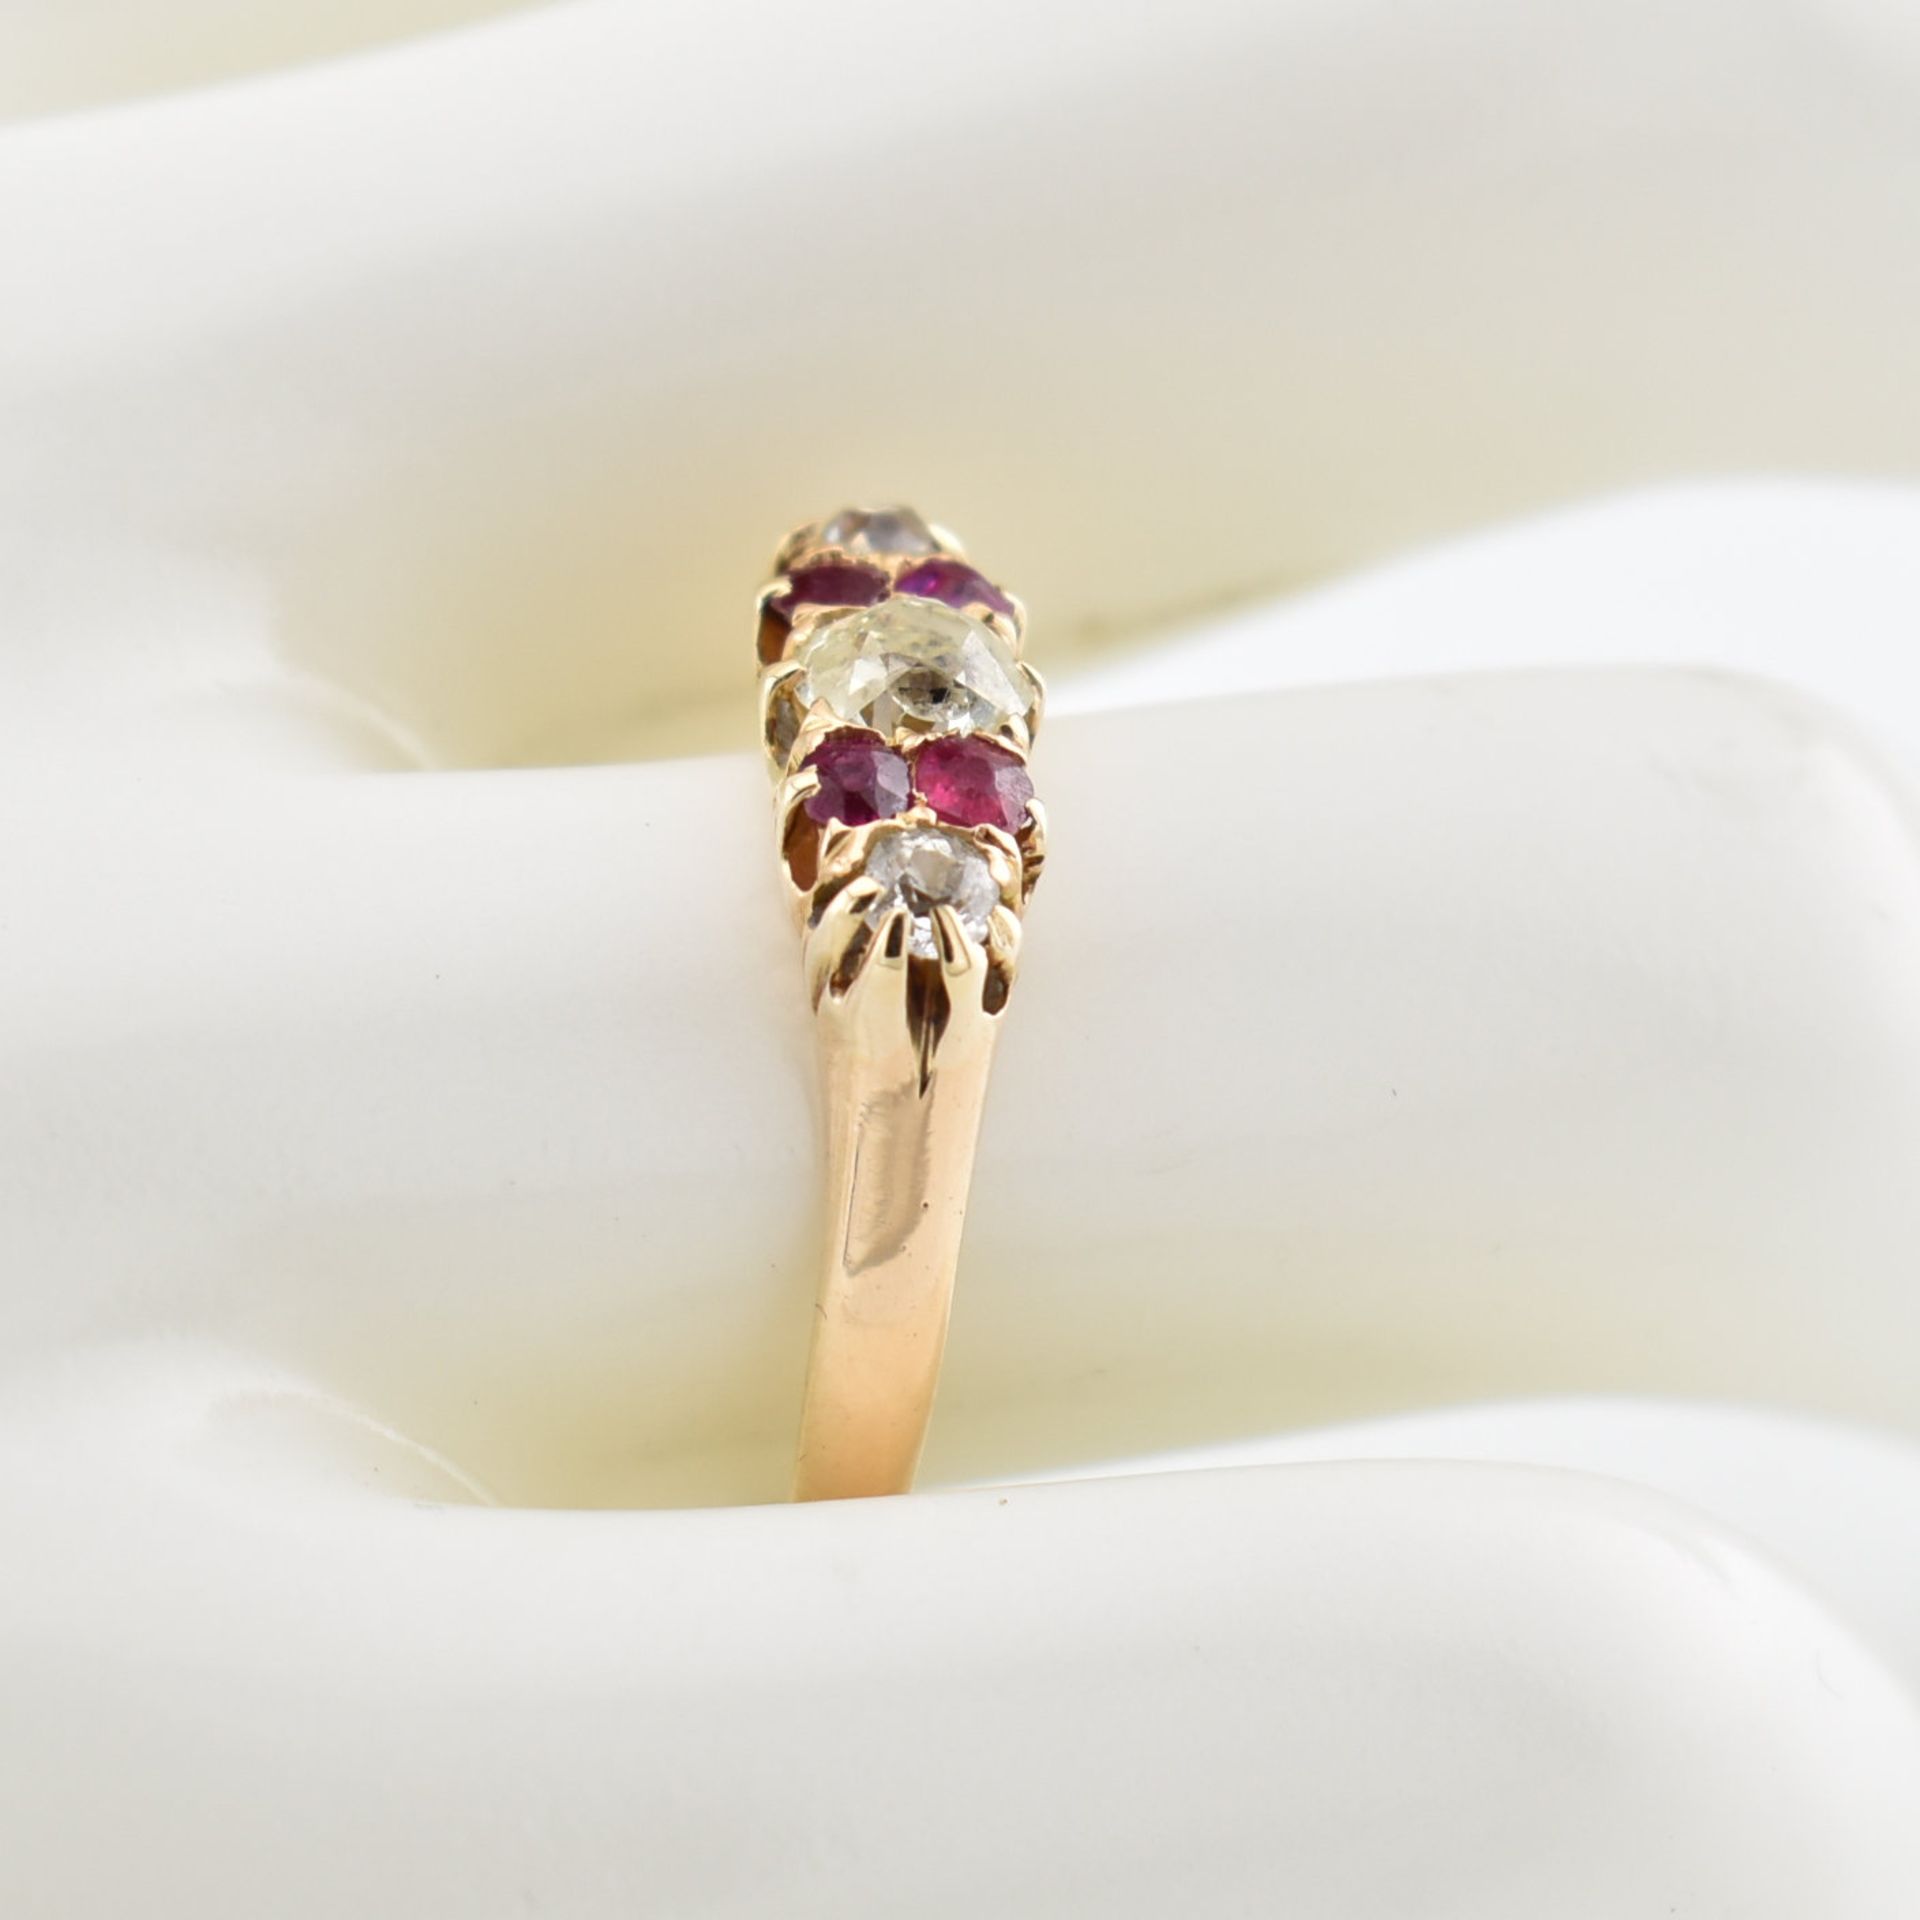 VICTORIAN HALLMARKED 18CT GOLD DIAMOND & RED STONE RING - Image 7 of 7